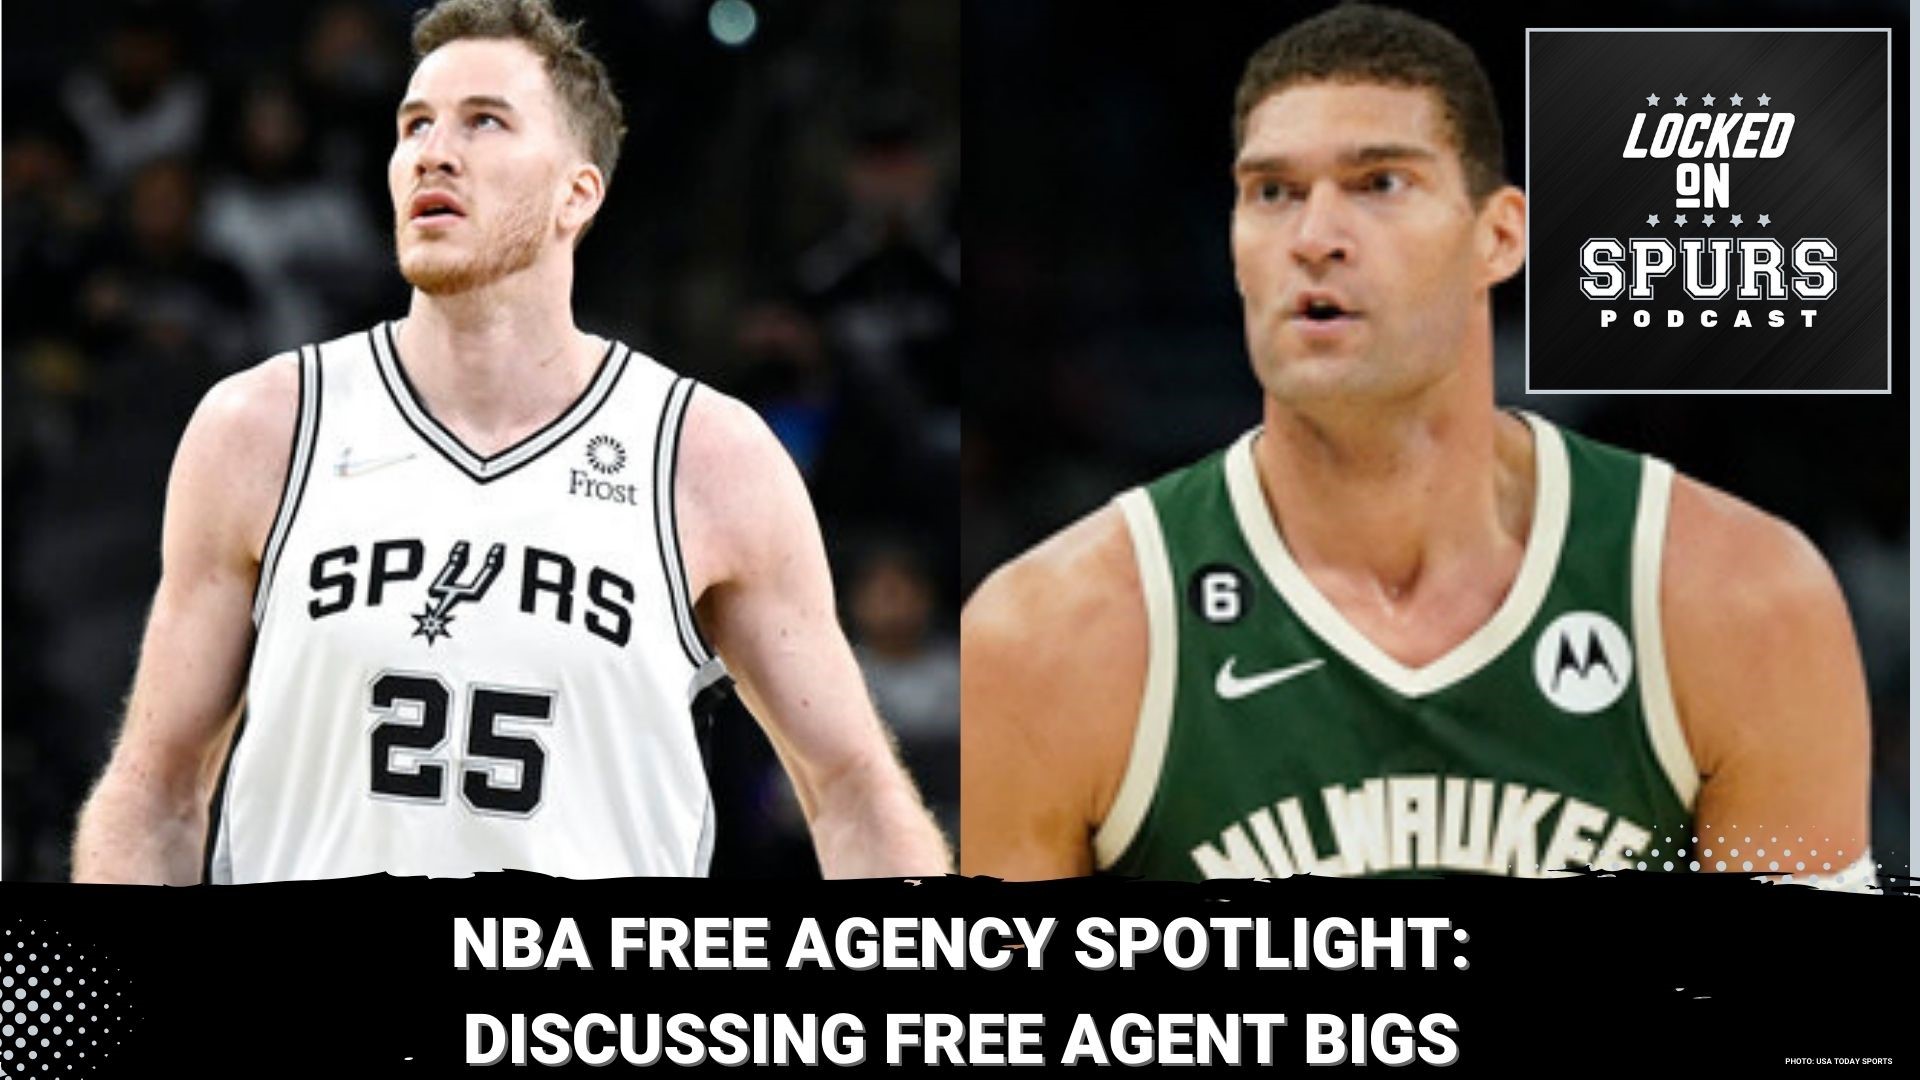 NBA Free Agency Available free agent bigs the Spurs could target Locked On Spurs kens5